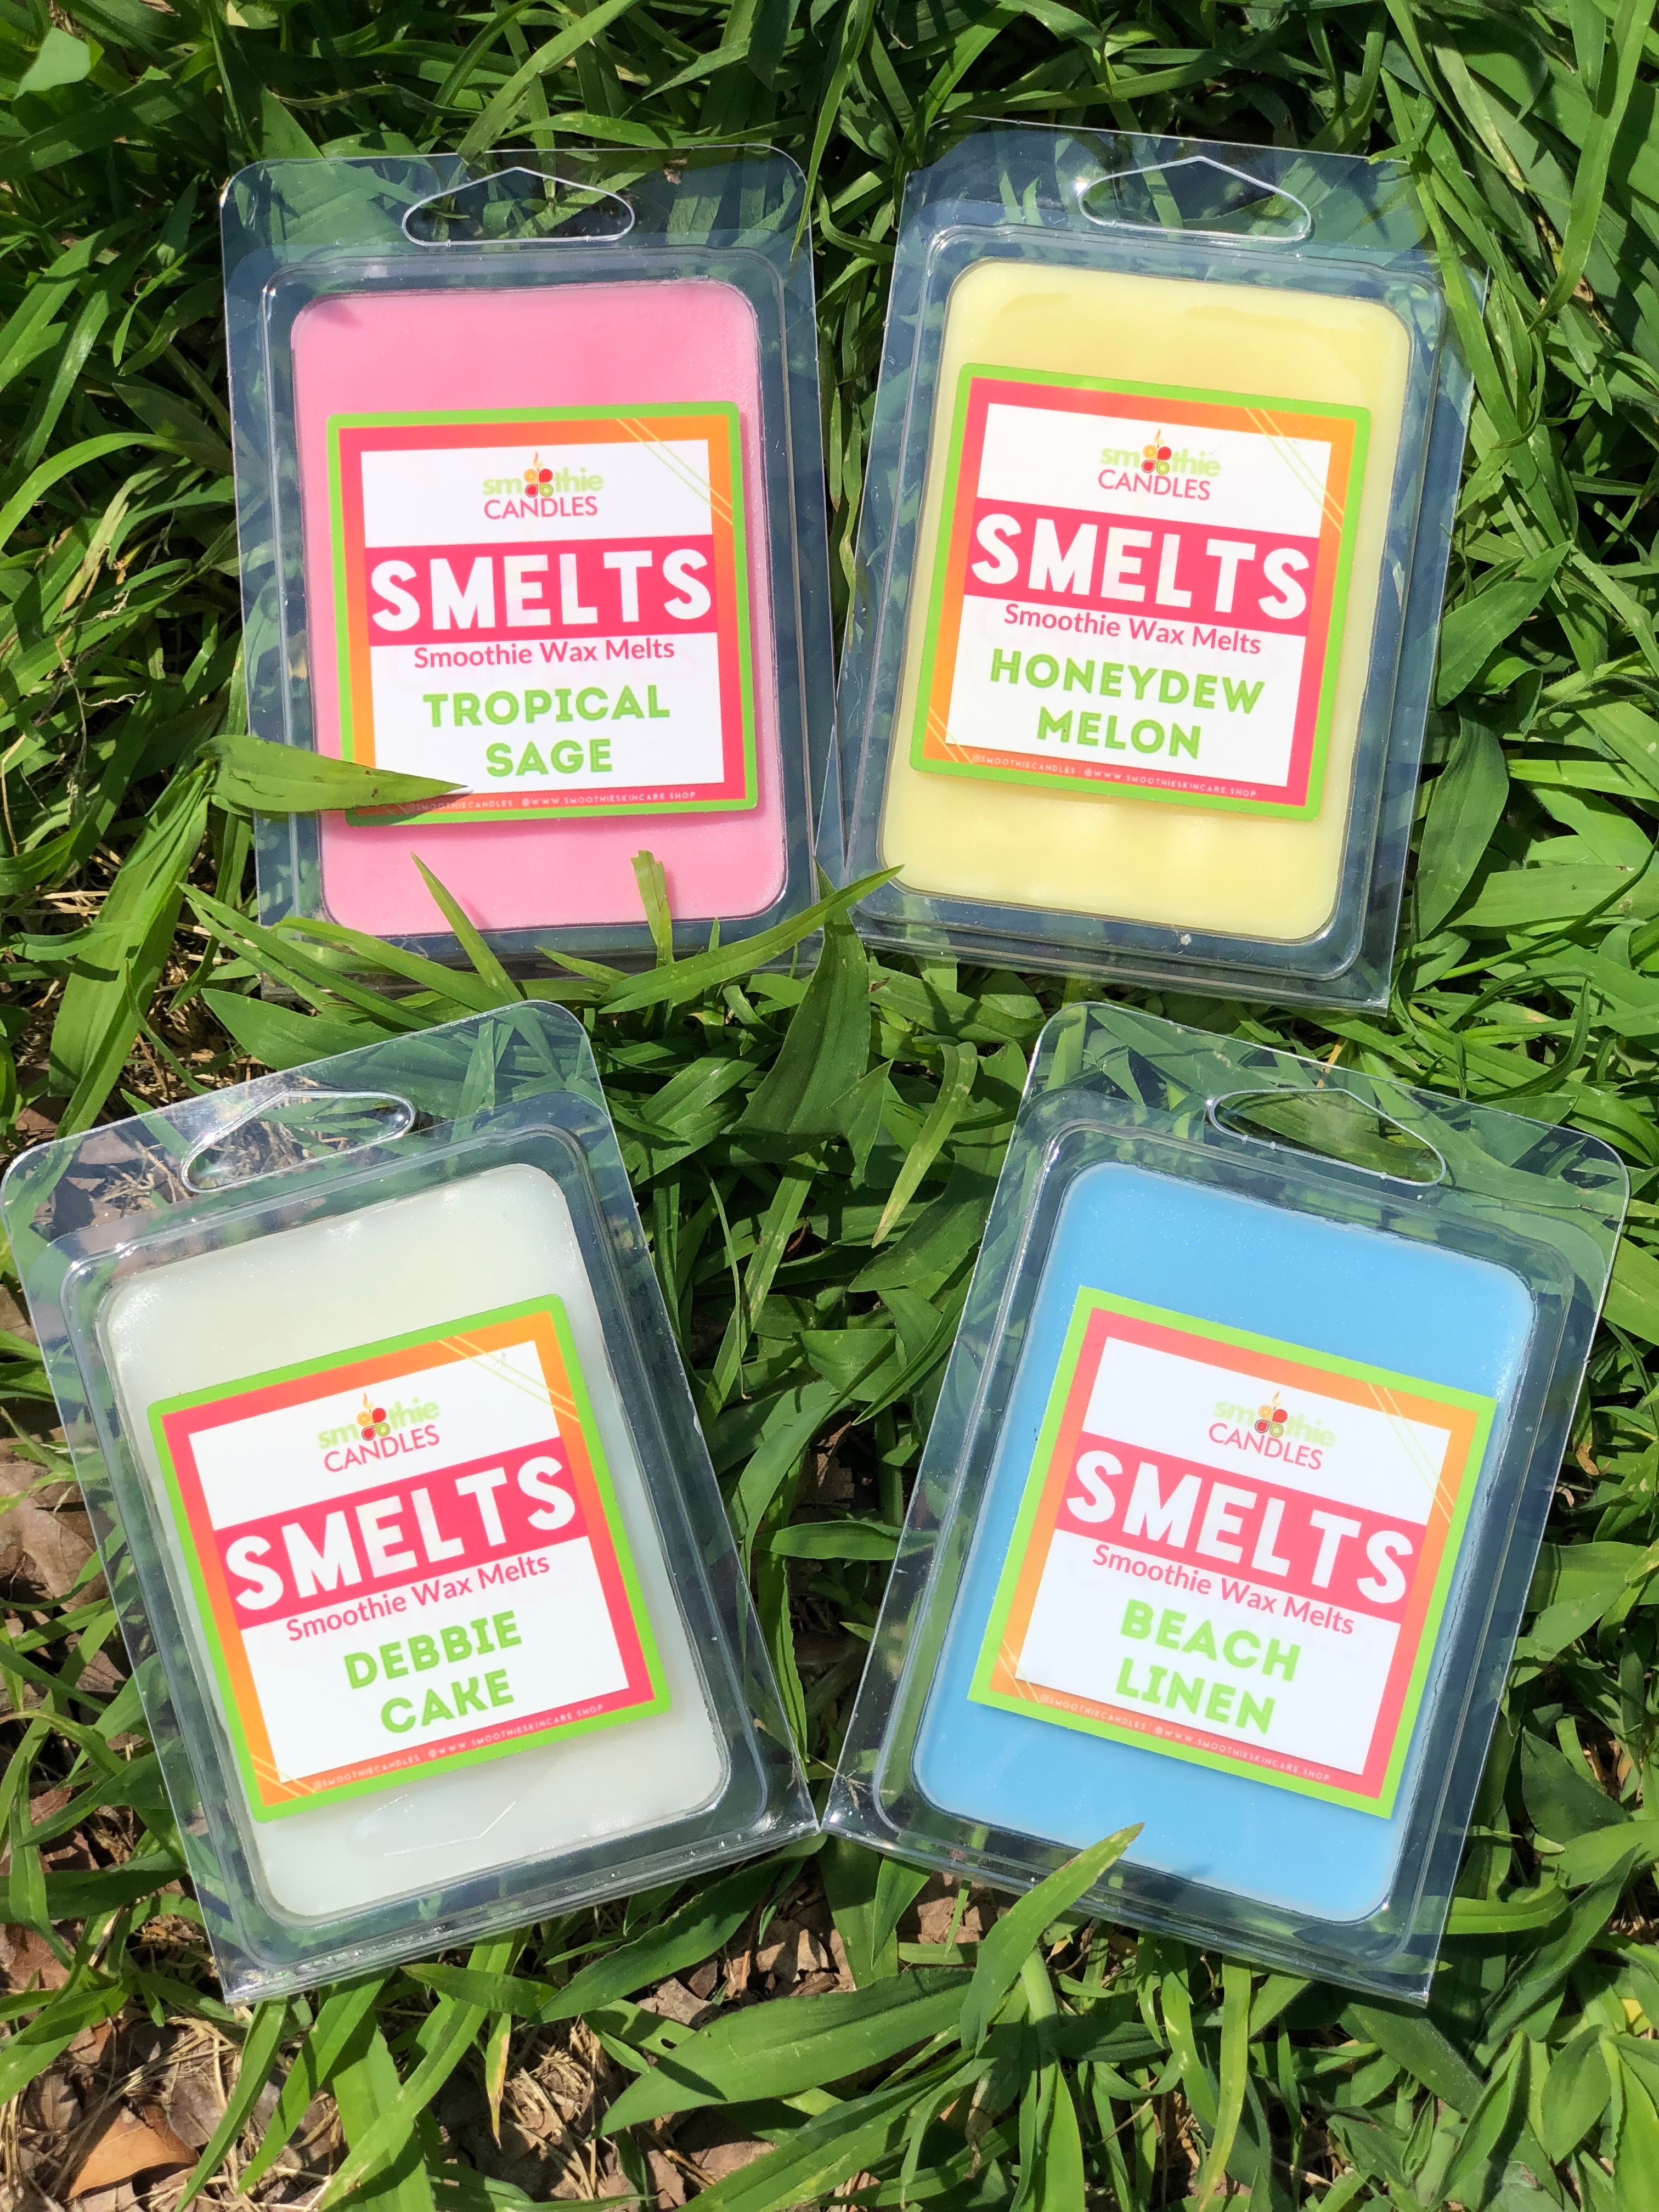 Smelts” Smoothie Wax Melts – Smoothie Skincare Co.